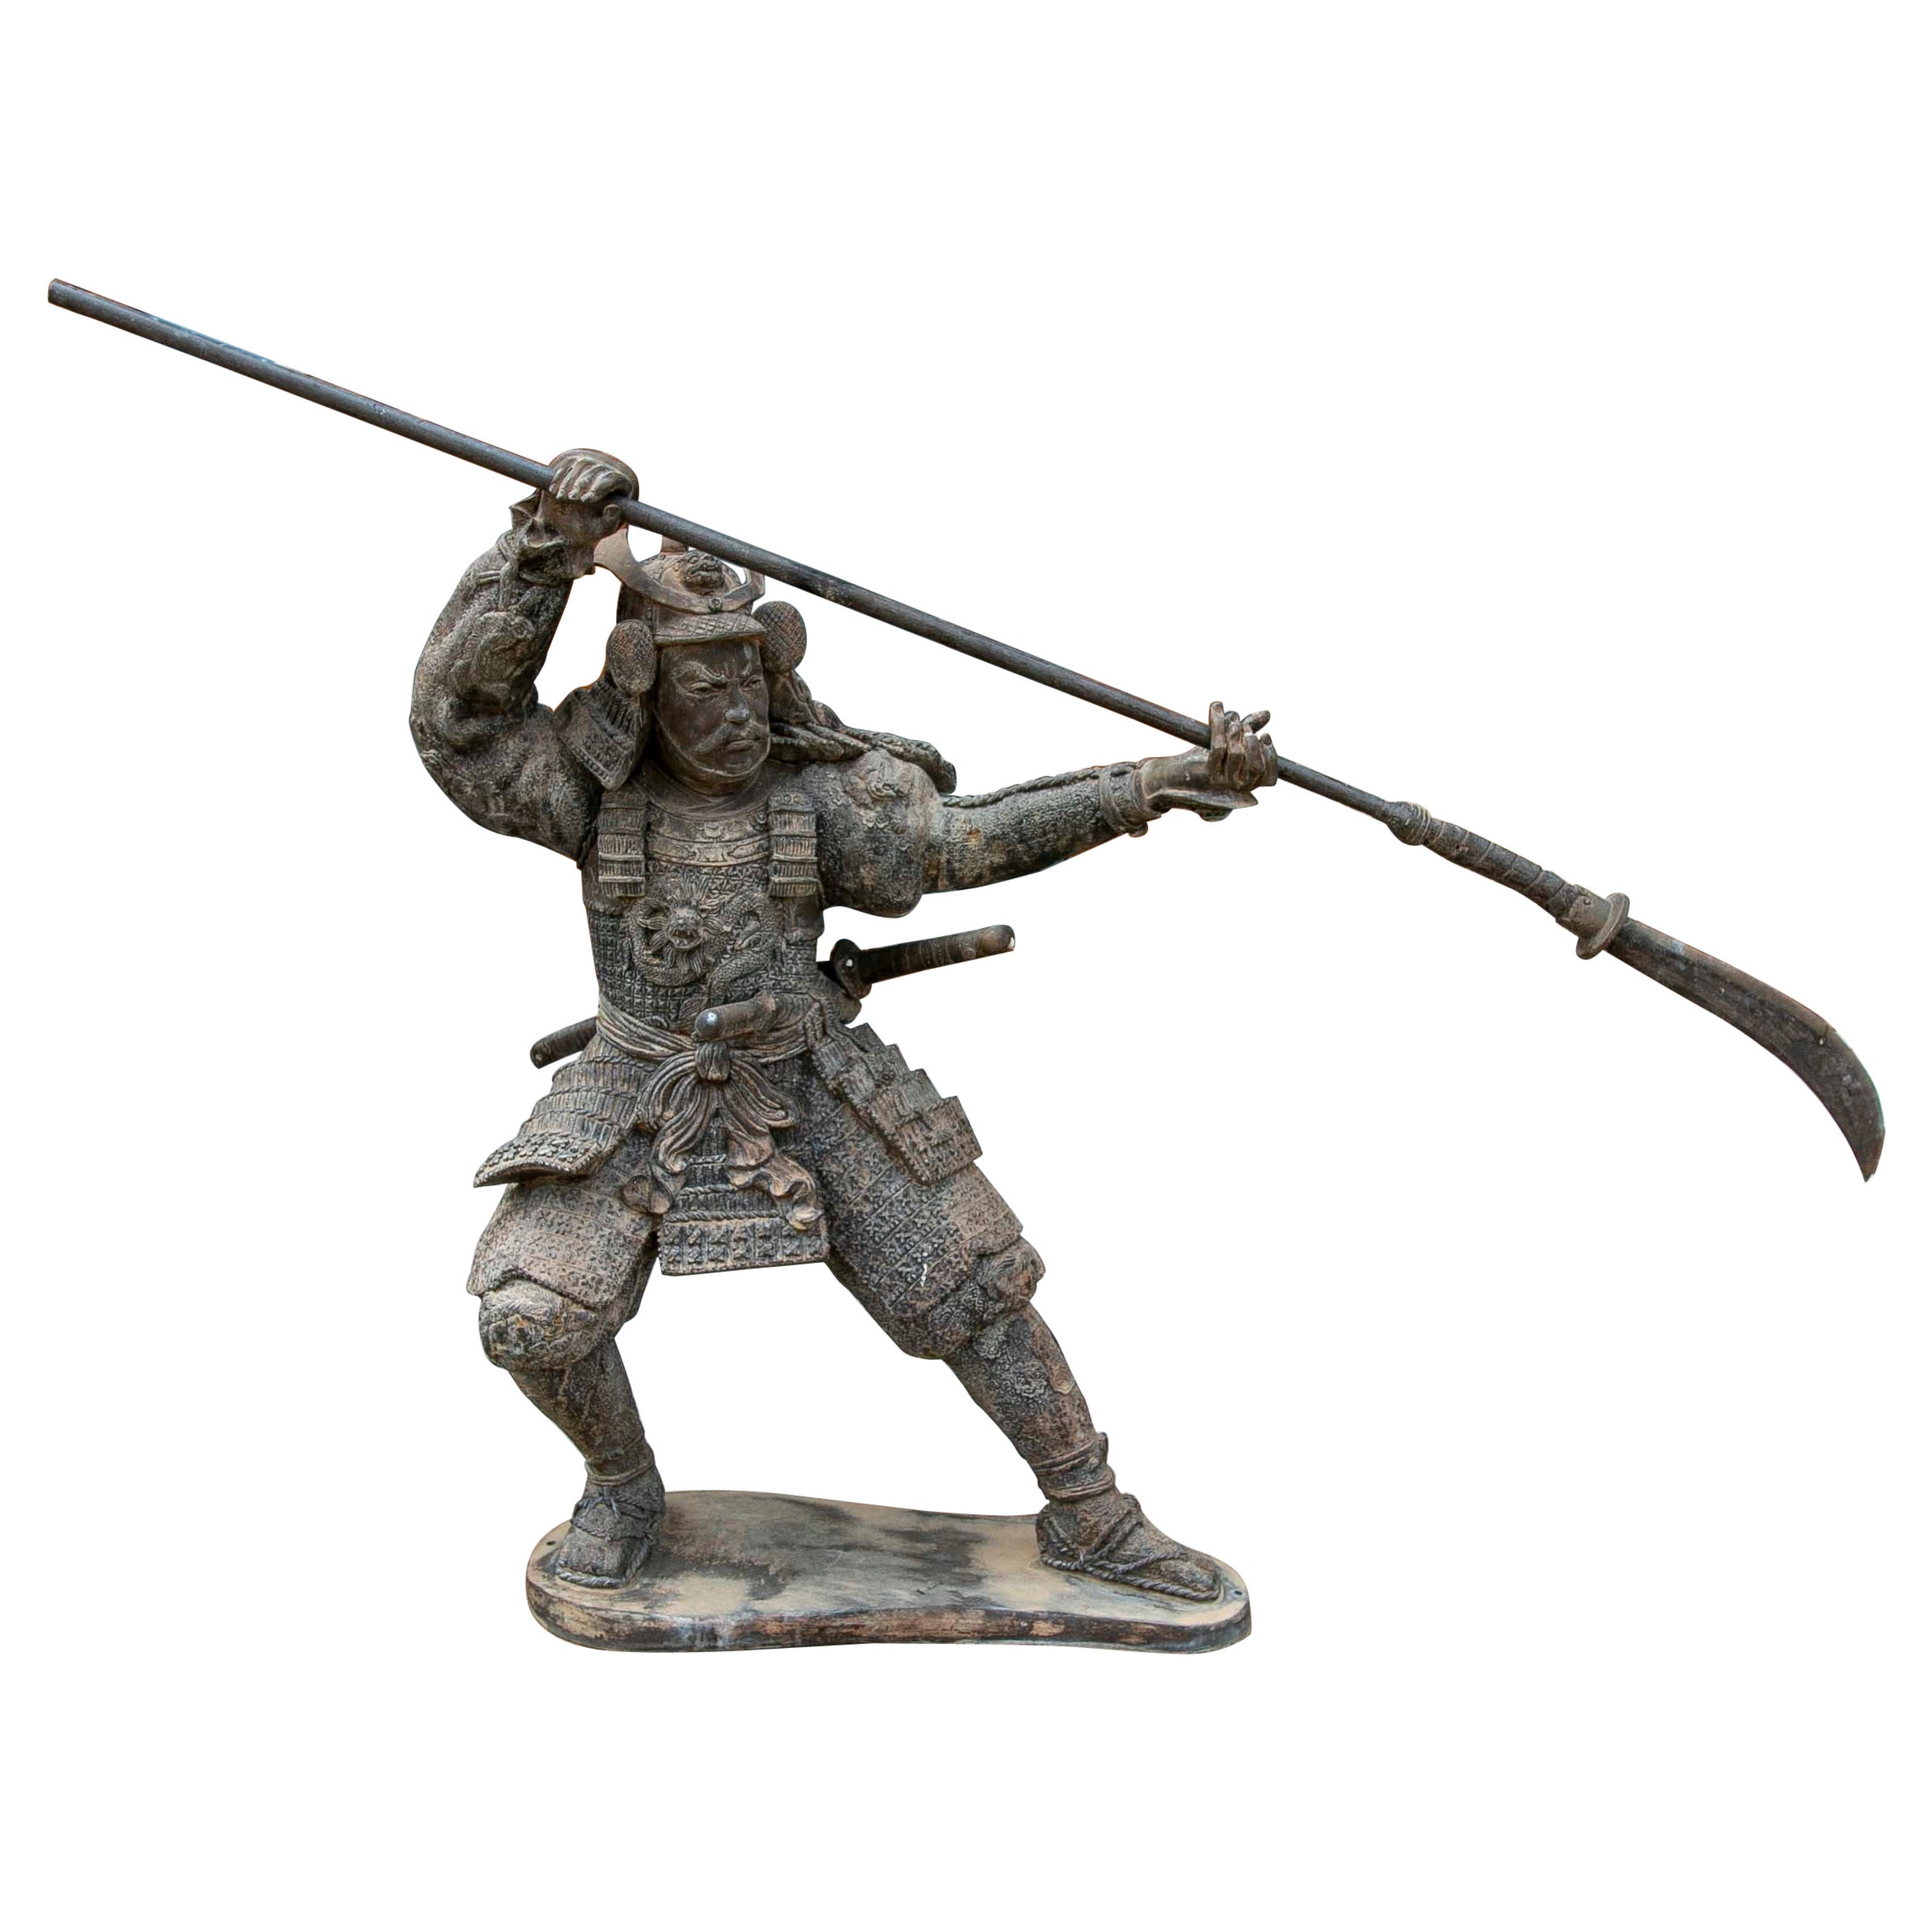 Bronze Sculpture of Samurai with Spear in Attacking Position